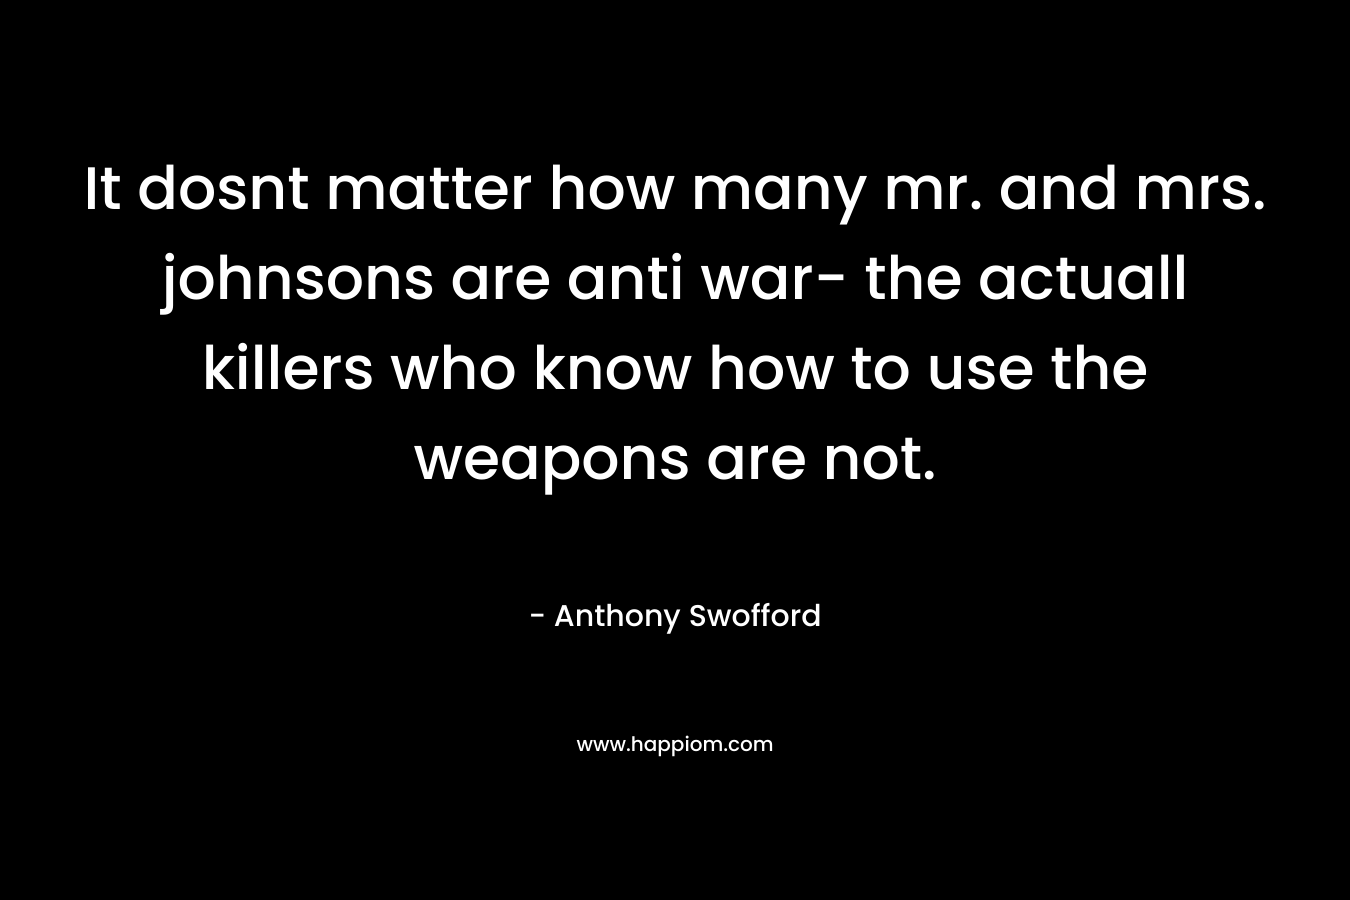 It dosnt matter how many mr. and mrs. johnsons are anti war- the actuall killers who know how to use the weapons are not. – Anthony Swofford